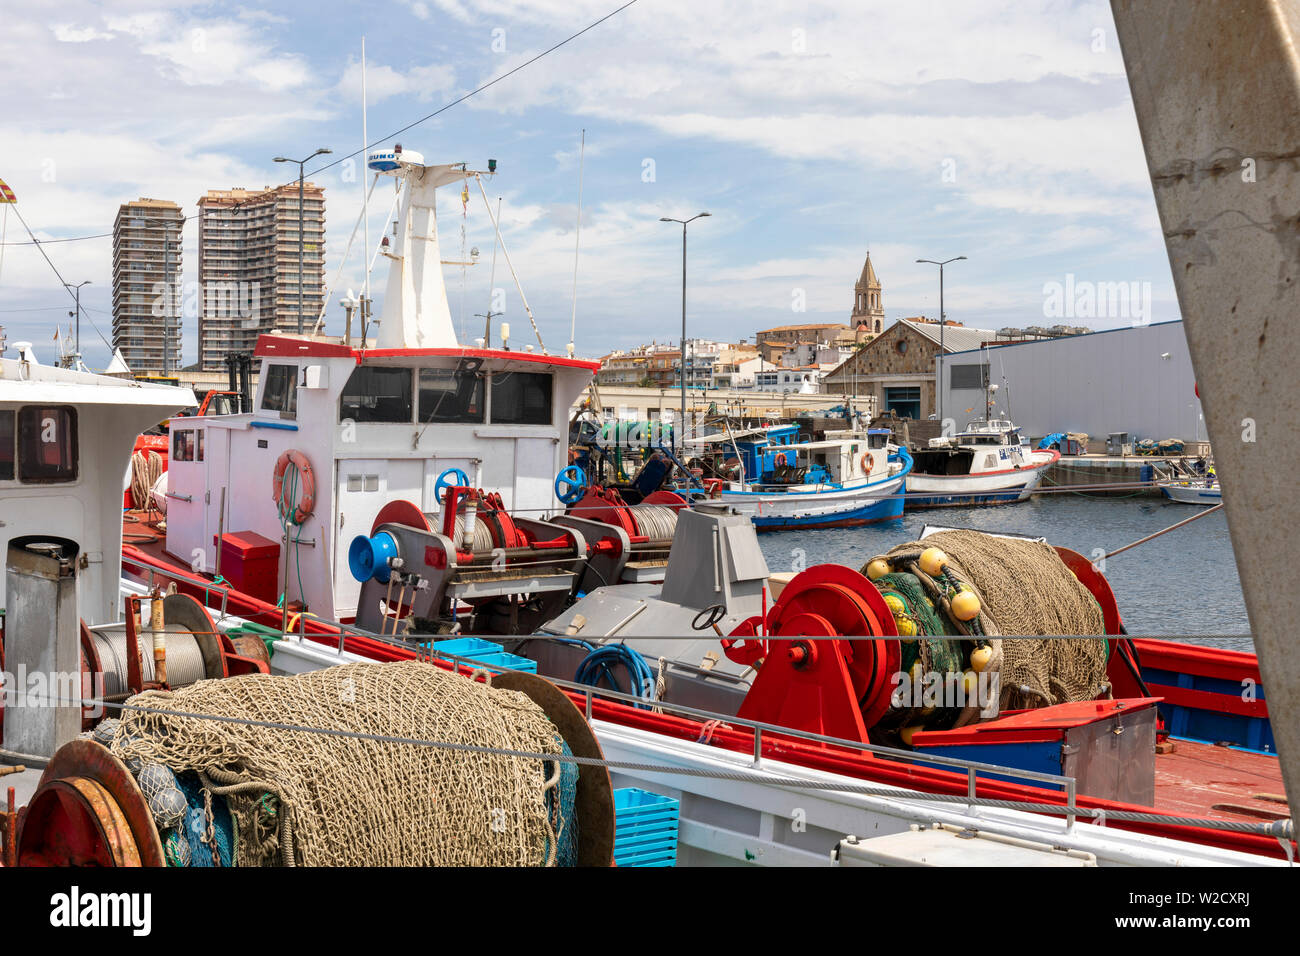 Fishing boats tied up alongside in Palamos Harbour, Spain Stock Photo